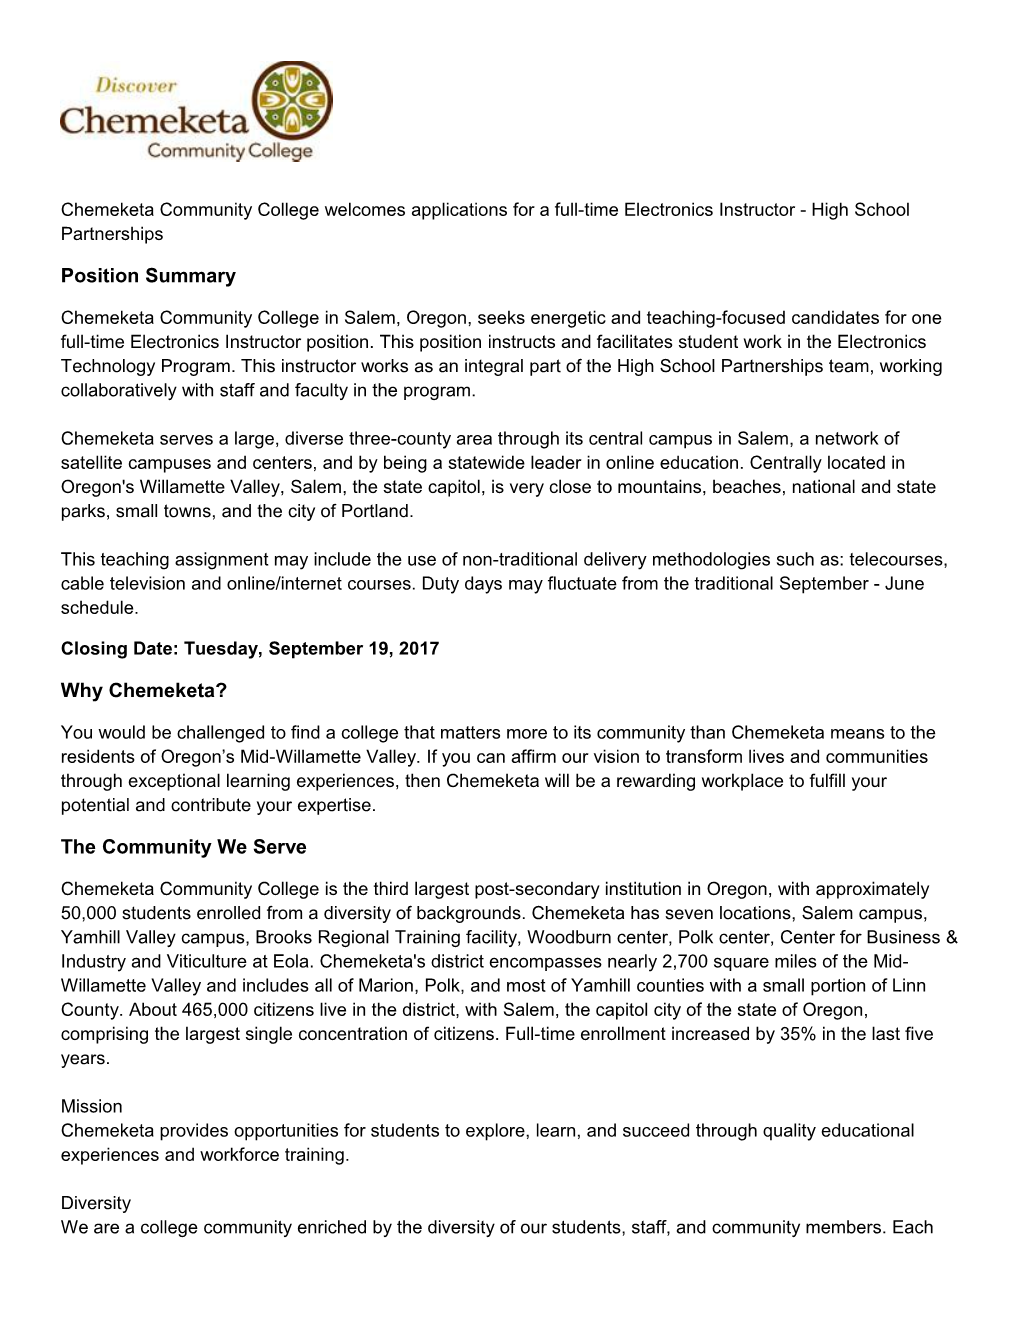 Chemeketa Community College Welcomes Applications for a Full-Timeelectronics Instructor